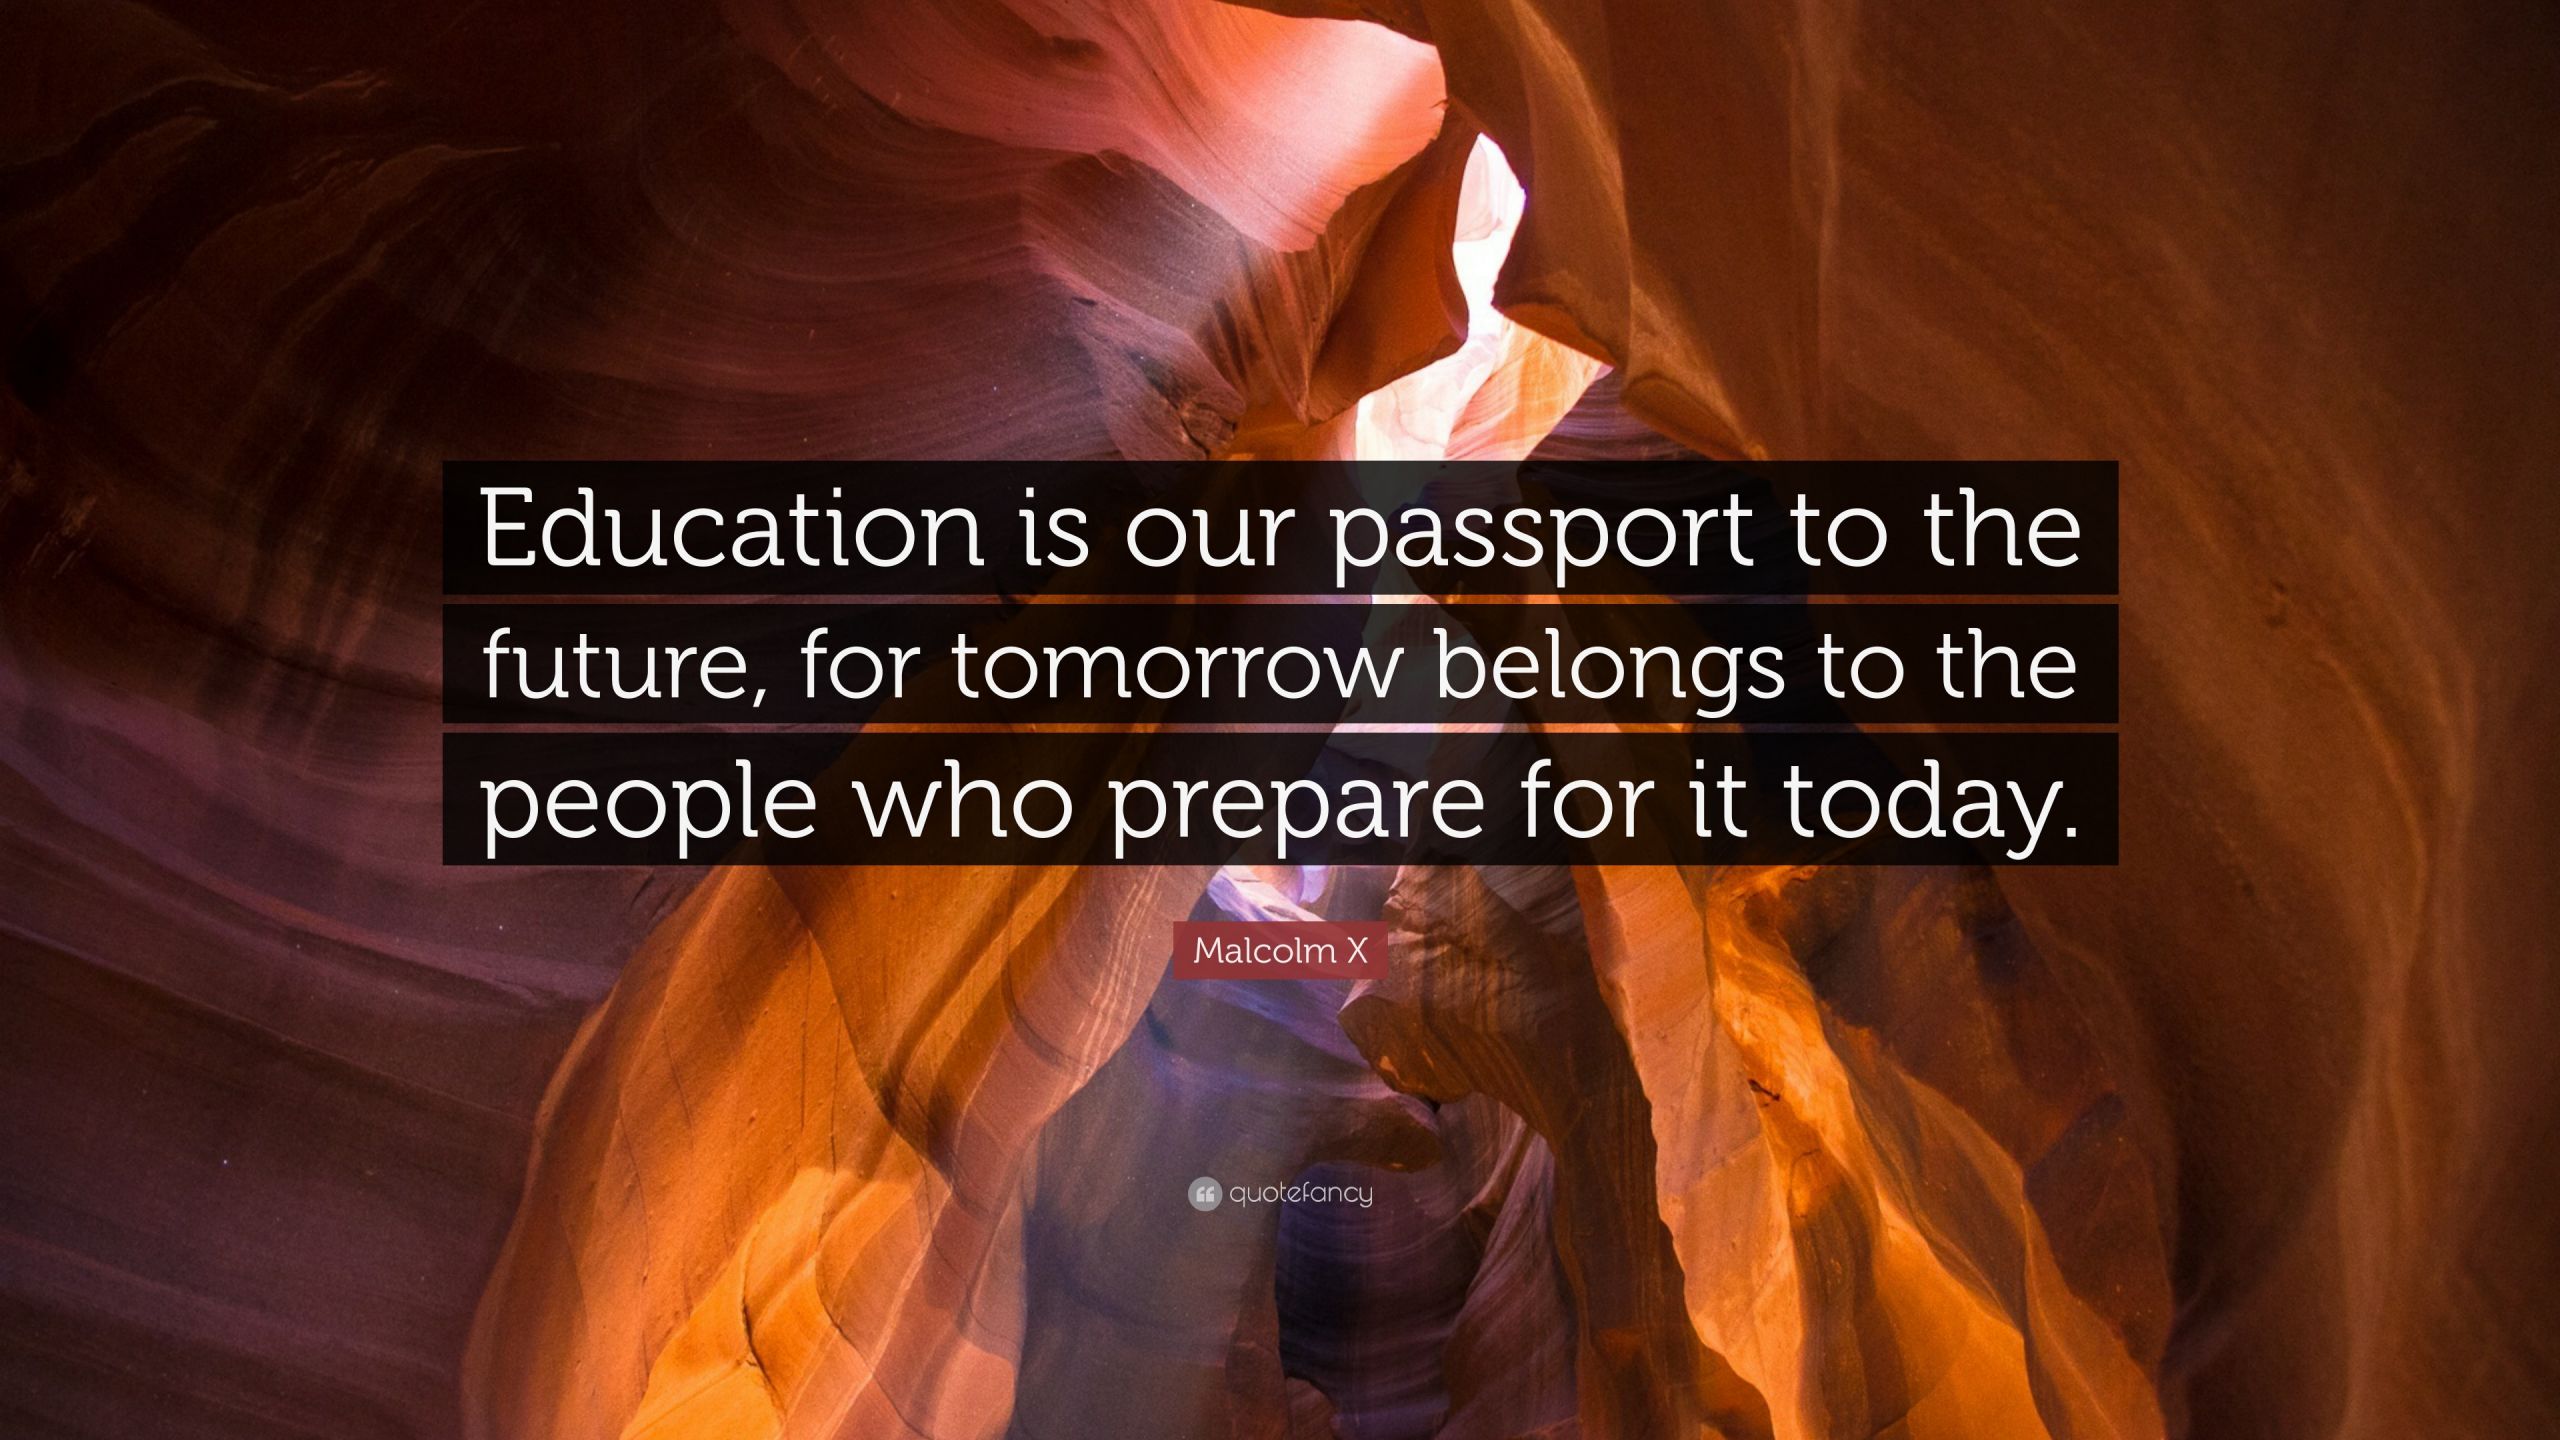 Malcolm X Quotes Education
 Malcolm X Quote “Education is our passport to the future